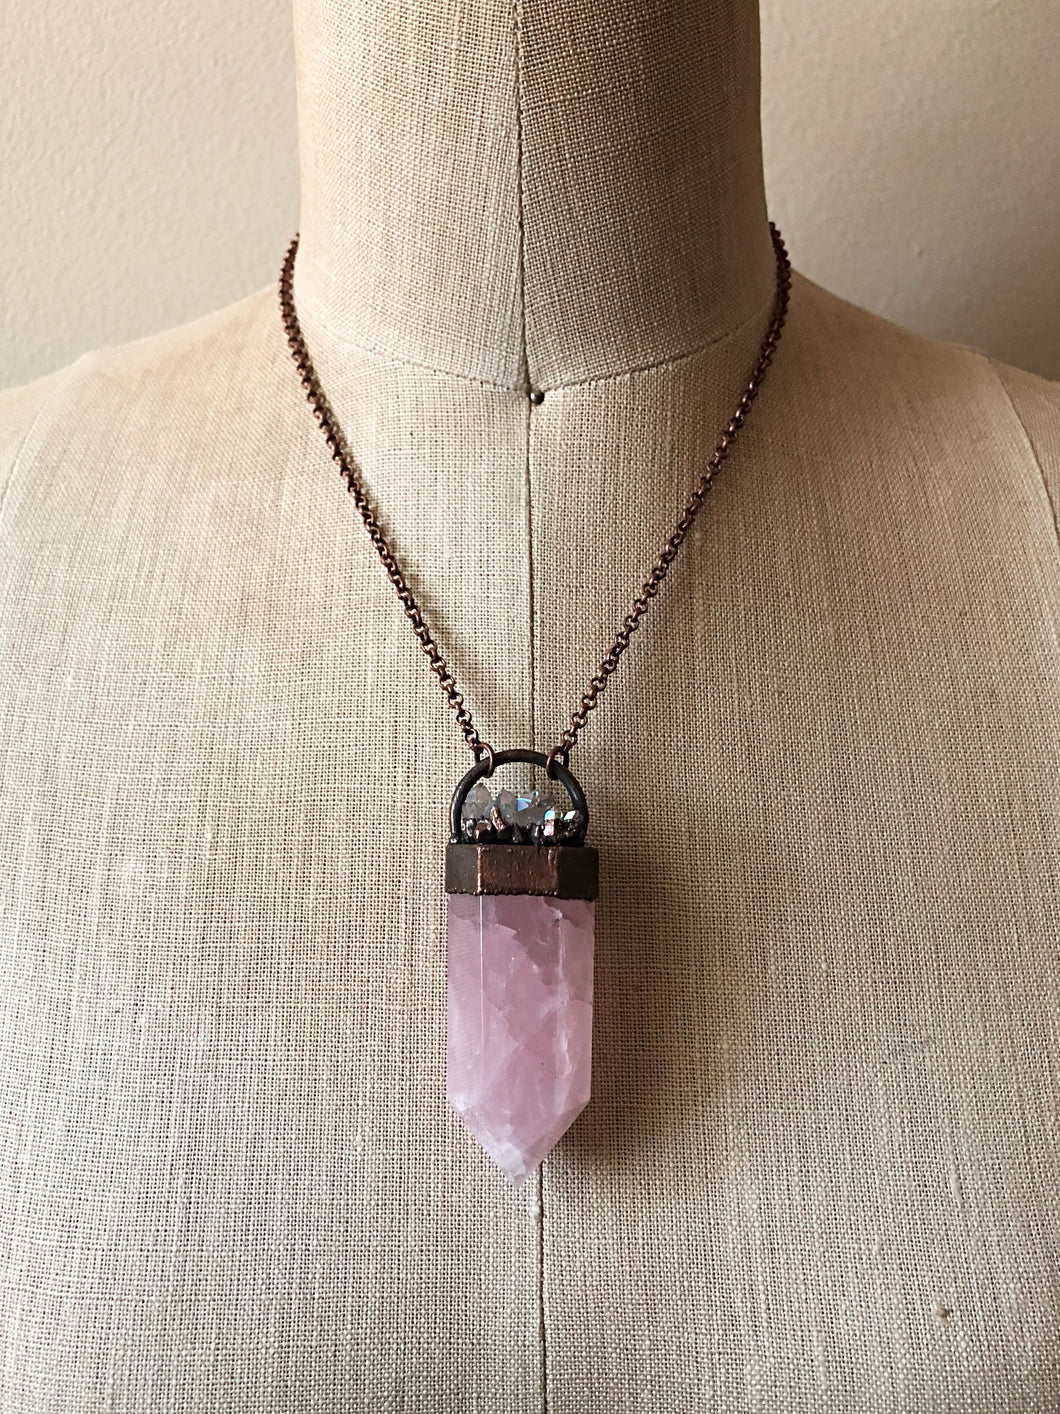 Rose Quartz Point with Angel Aura Cluster Short Necklace - Ready to Ship (Flower Moon Collection)